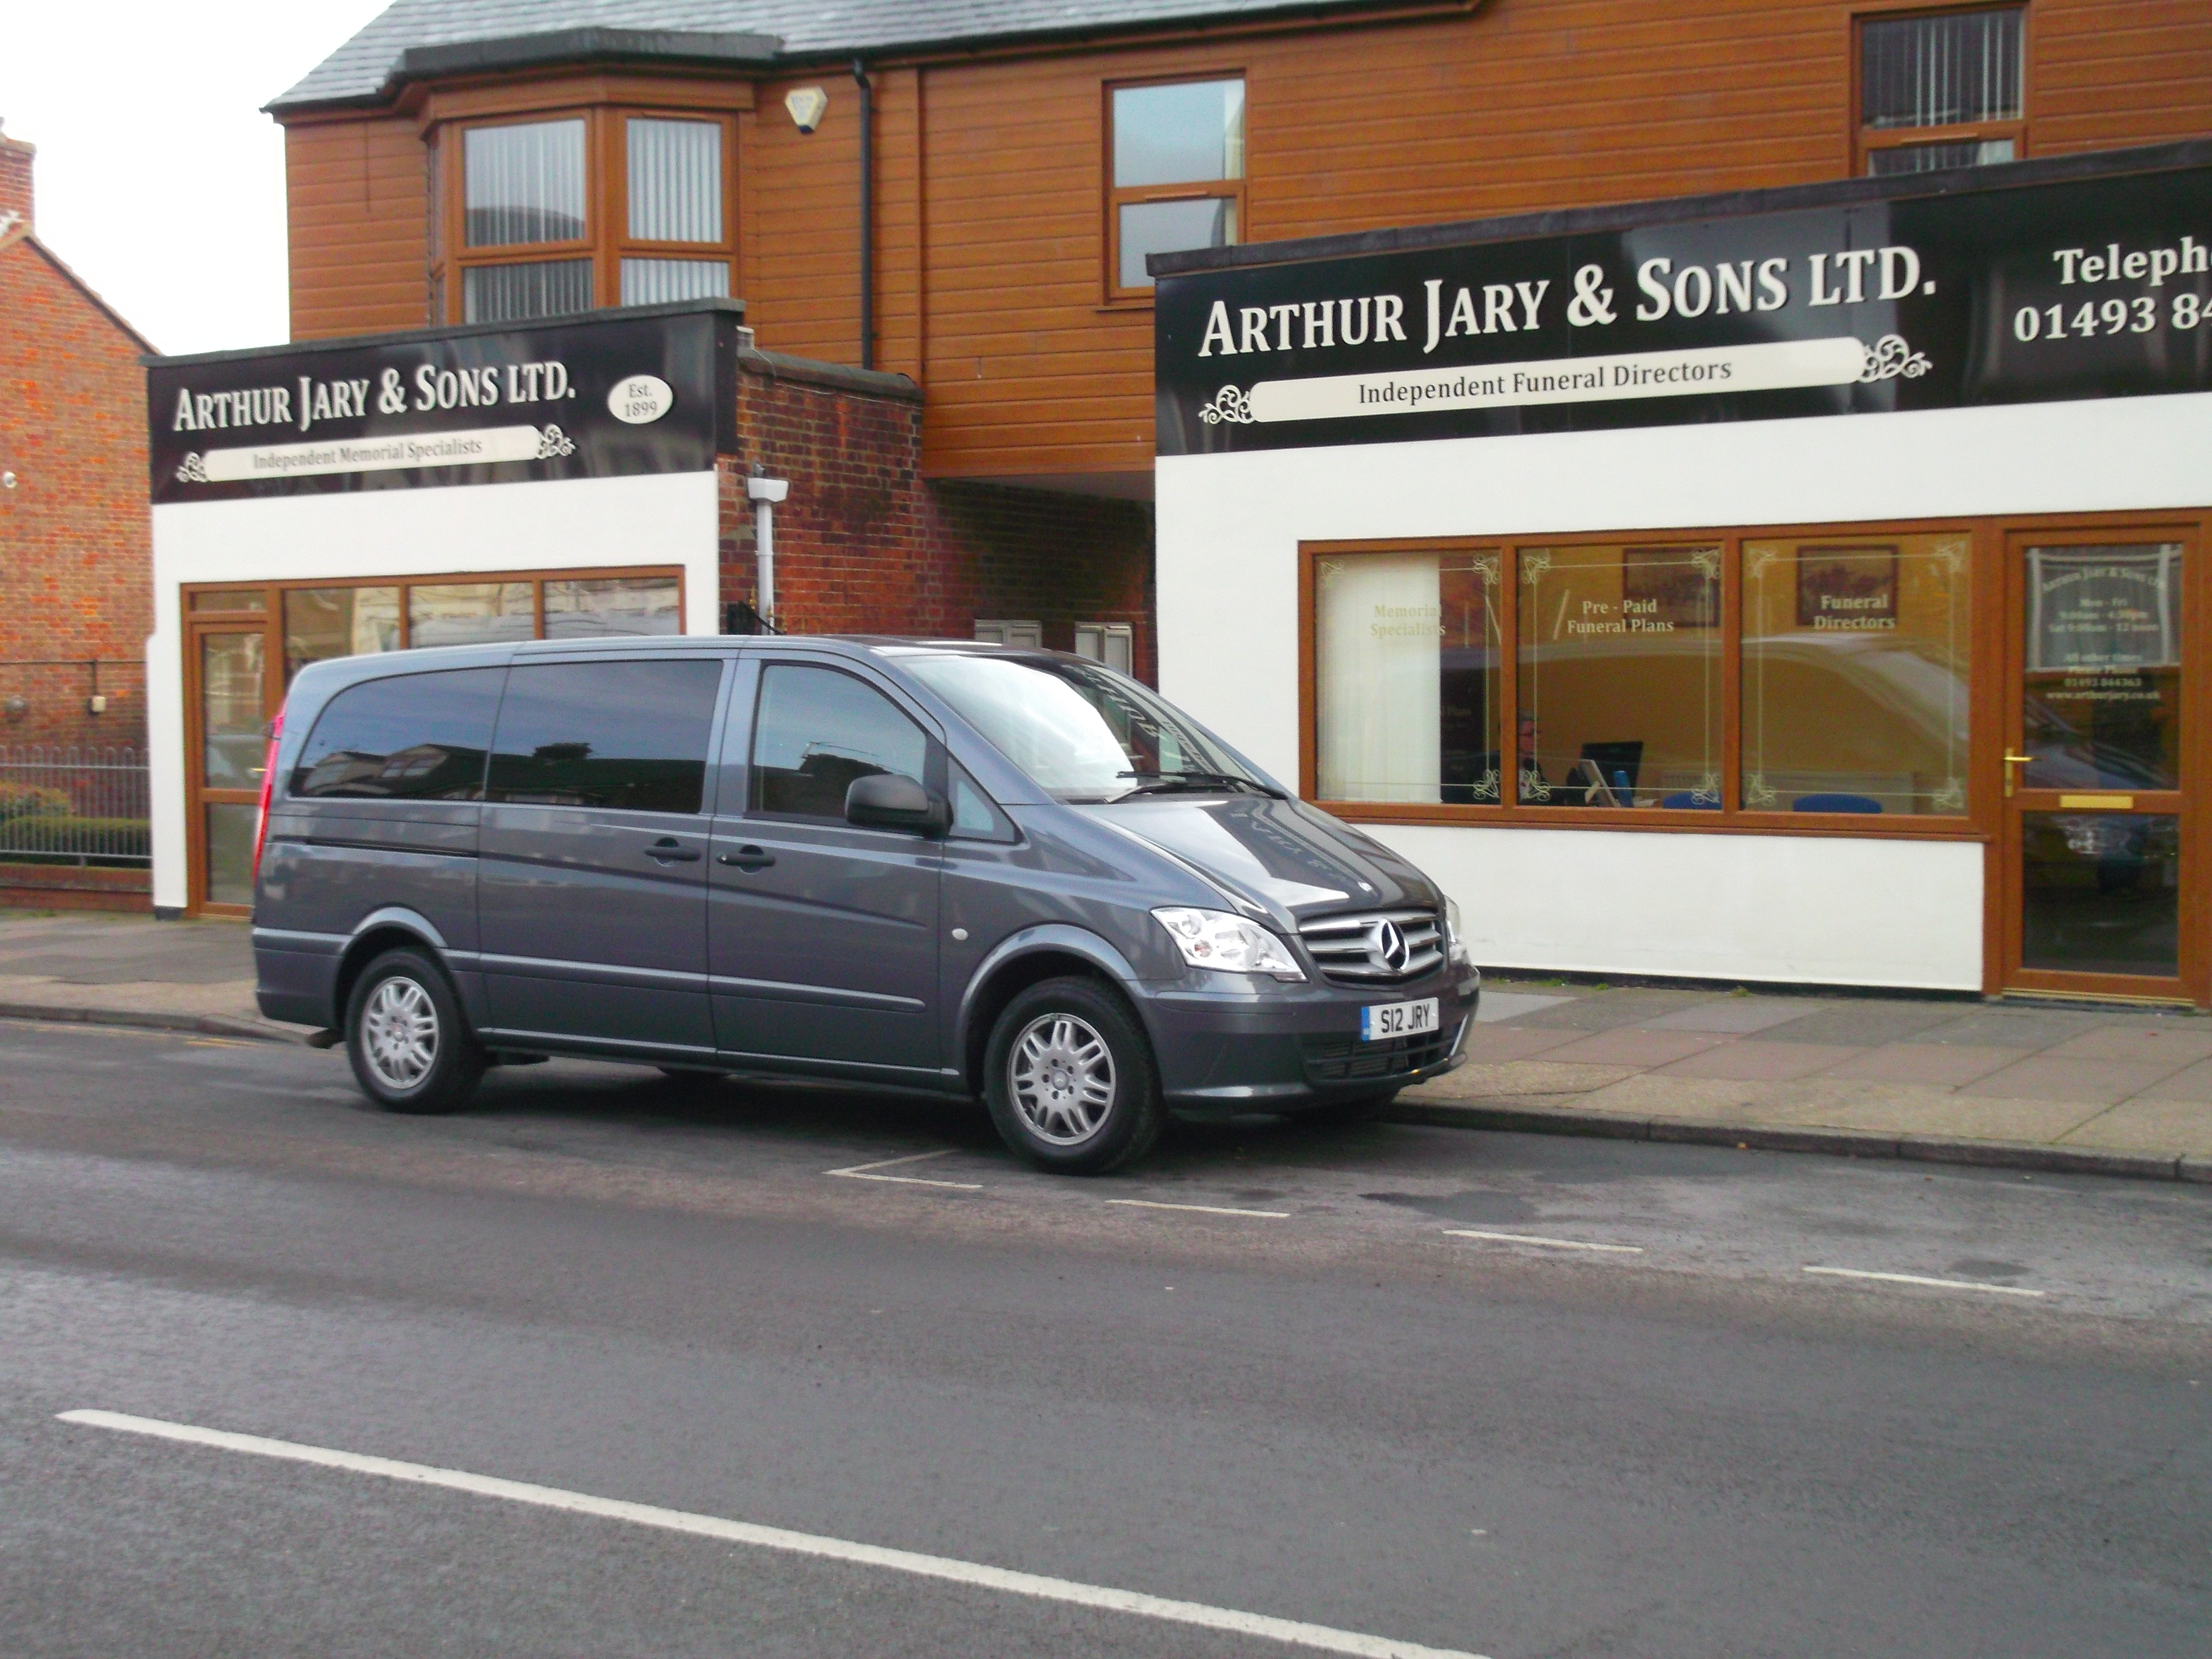 Superior service for new customer Arthur Jary & Sons Ltd starts with Mercedes Benz Vito